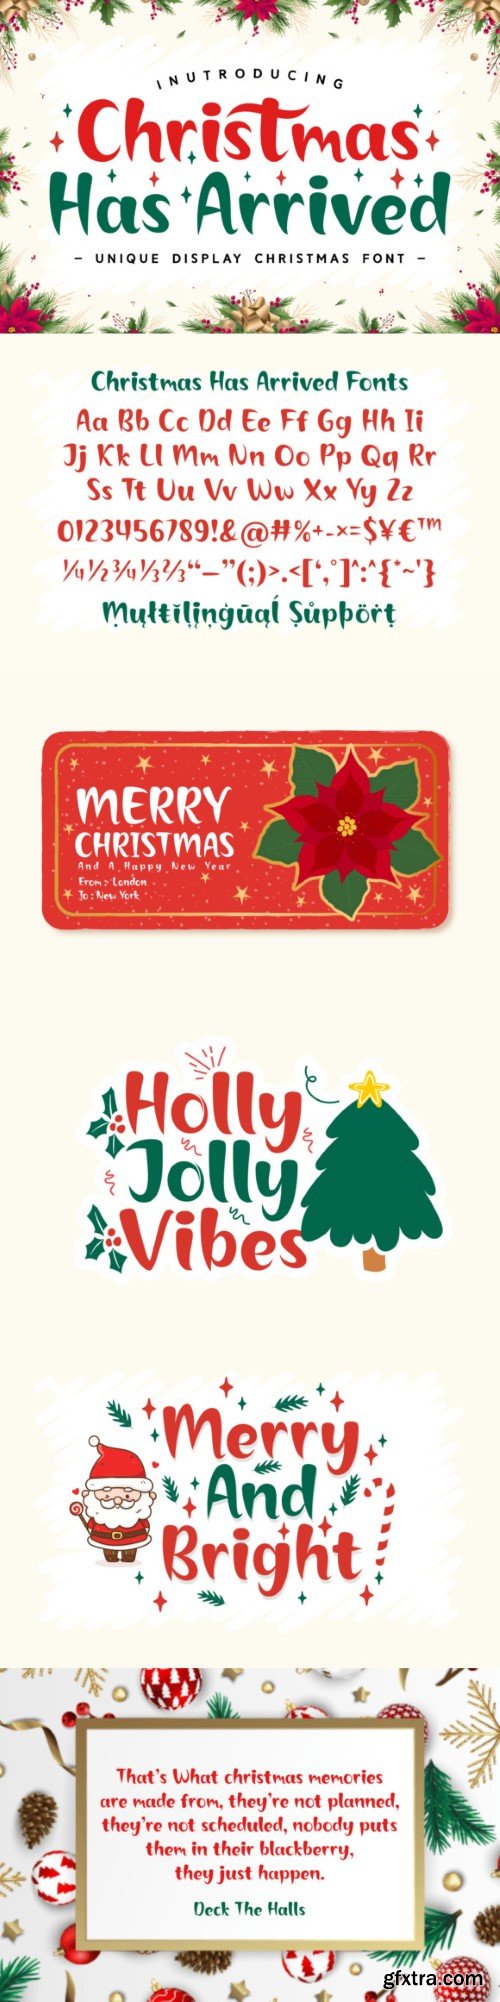 Christmas Has Arrived Font